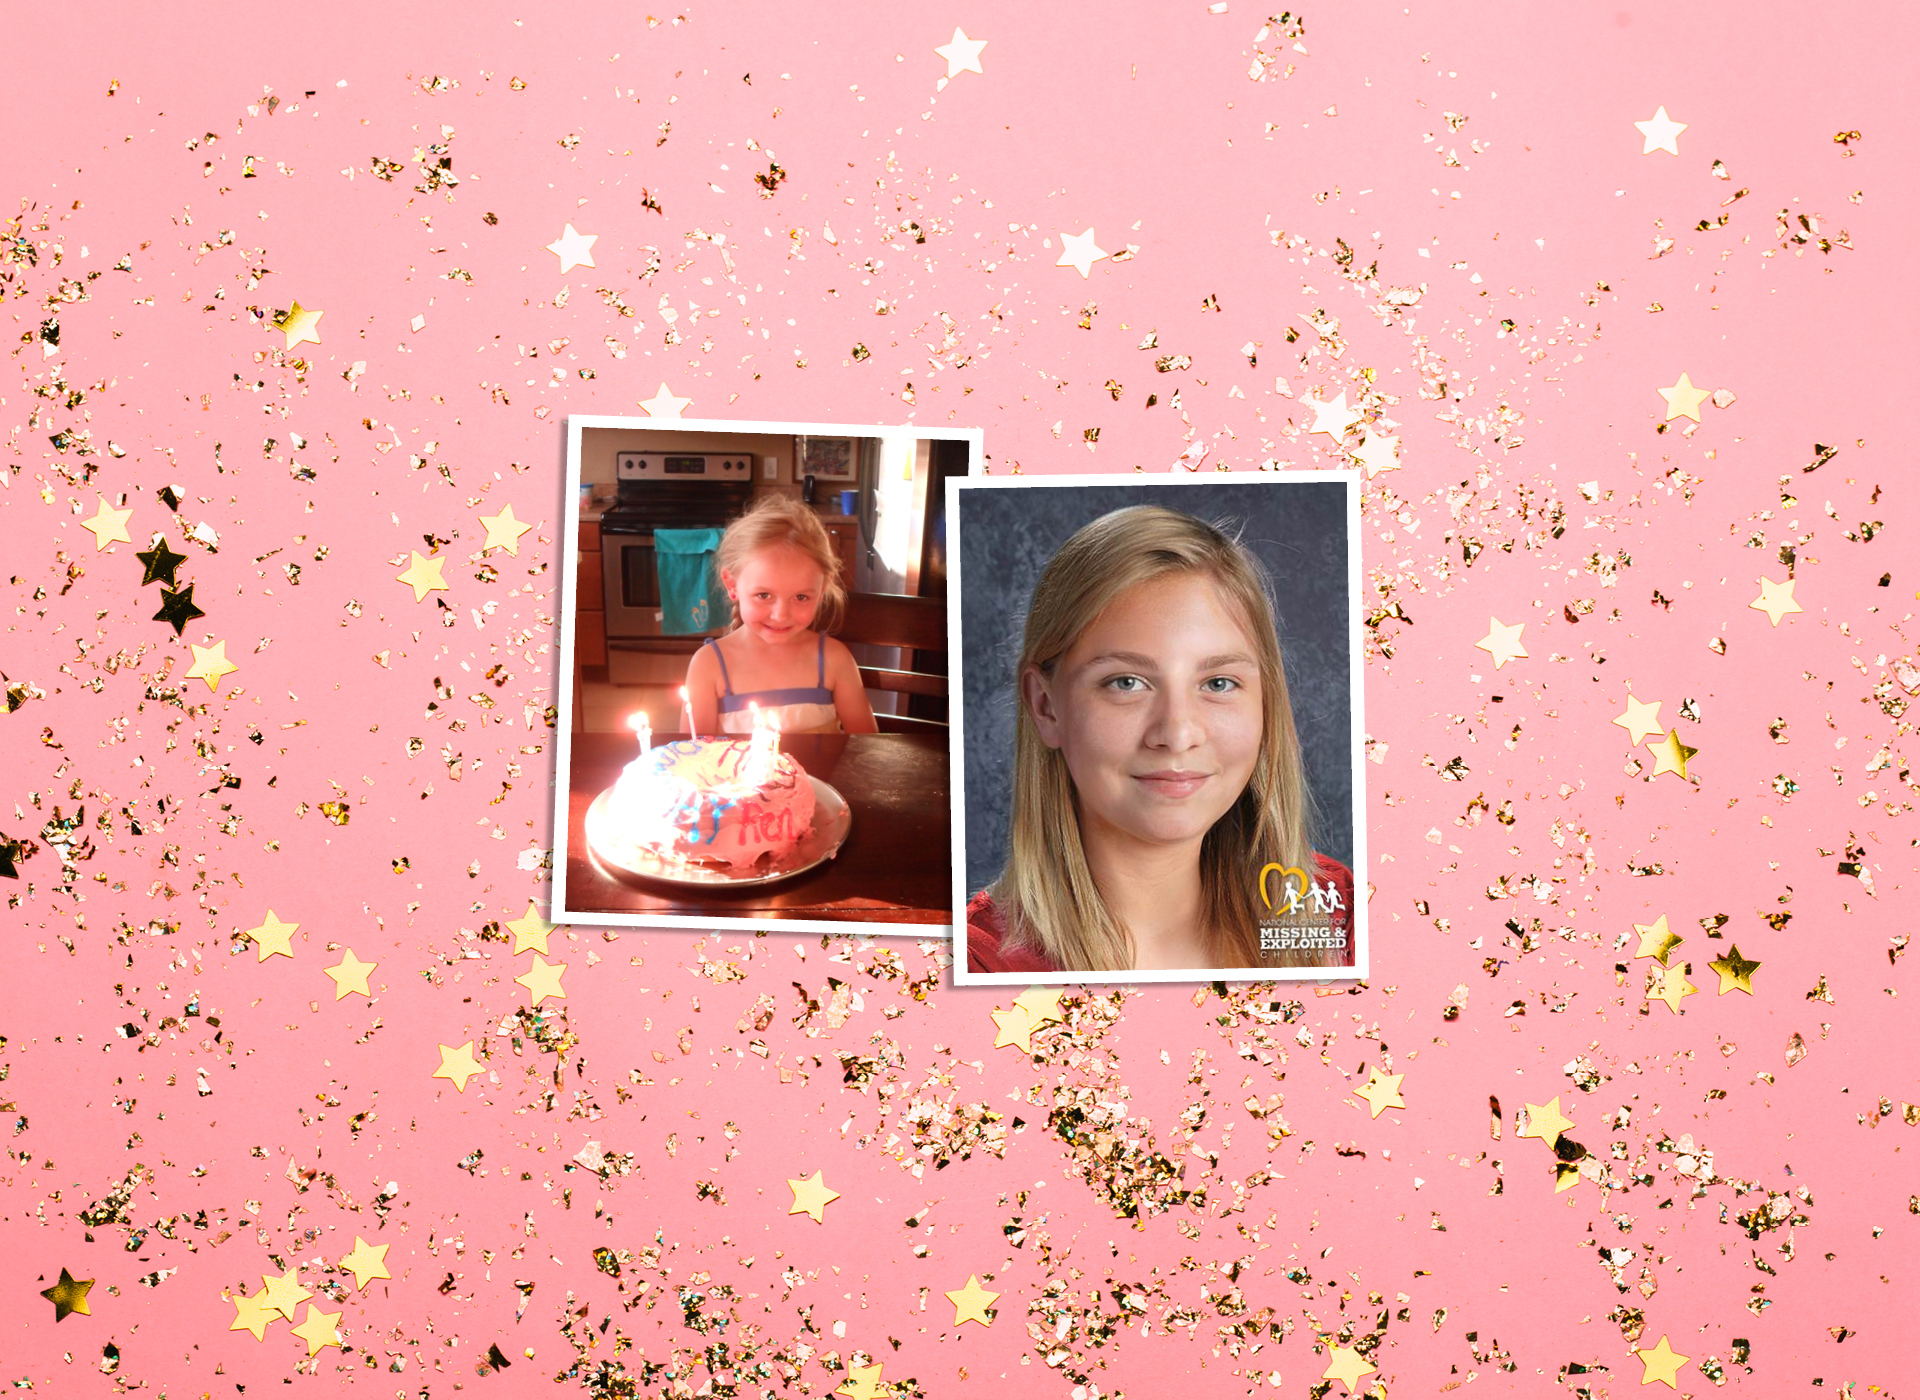 two images: serenity as a child blowing out birthday candles (l) and the age progression of what she may look like now (r) against a pink confetti background